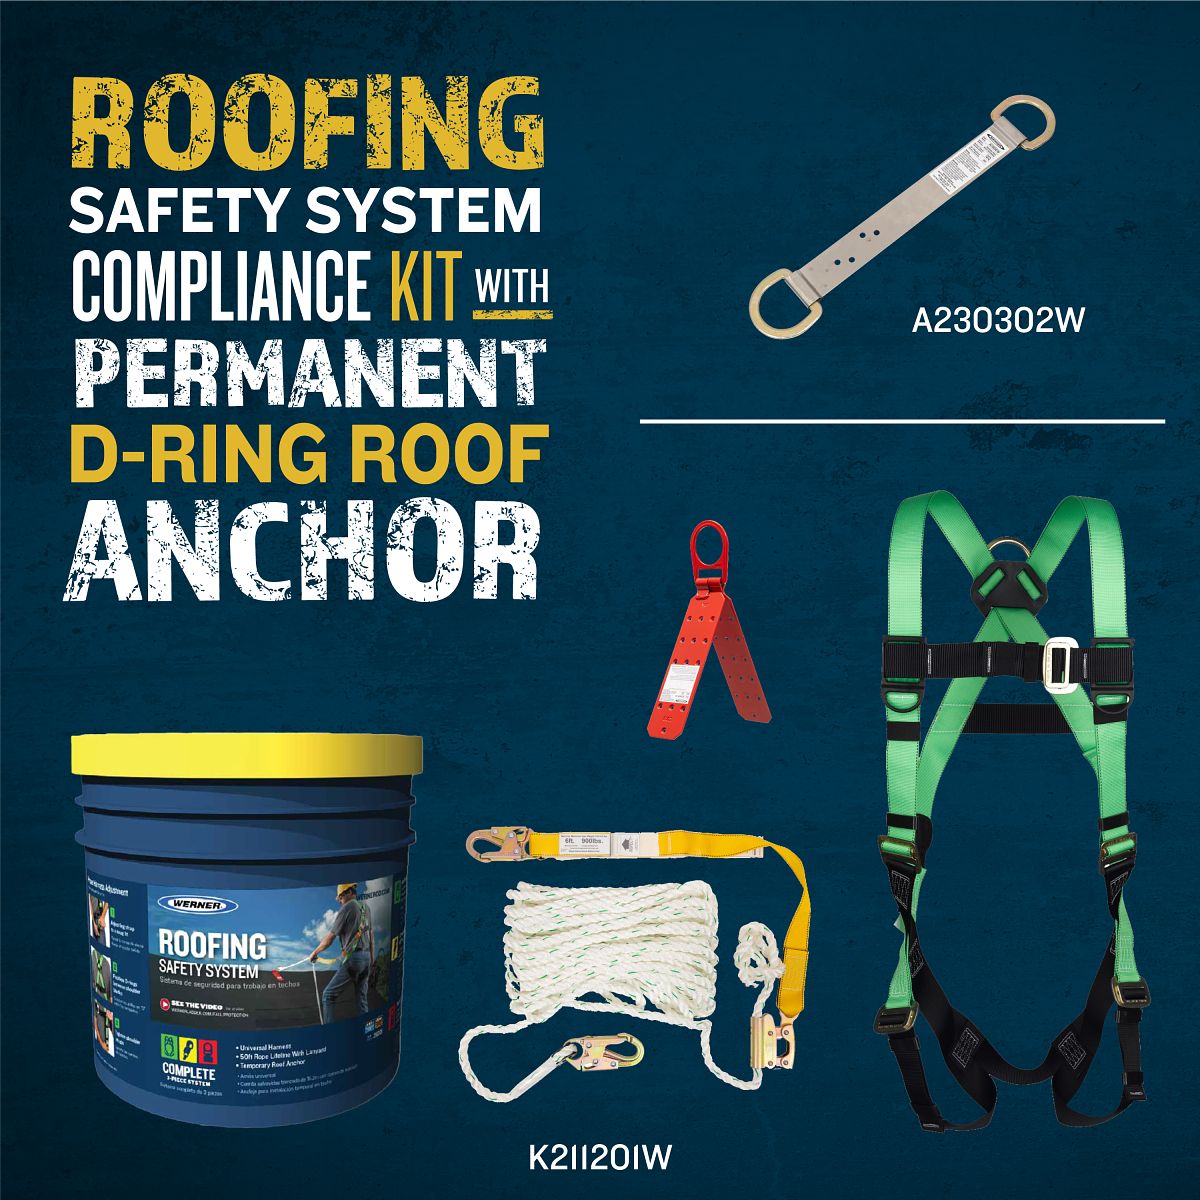 Werner 50ft Basic Roofing Fall Protection Kit in Bucket (K11201)